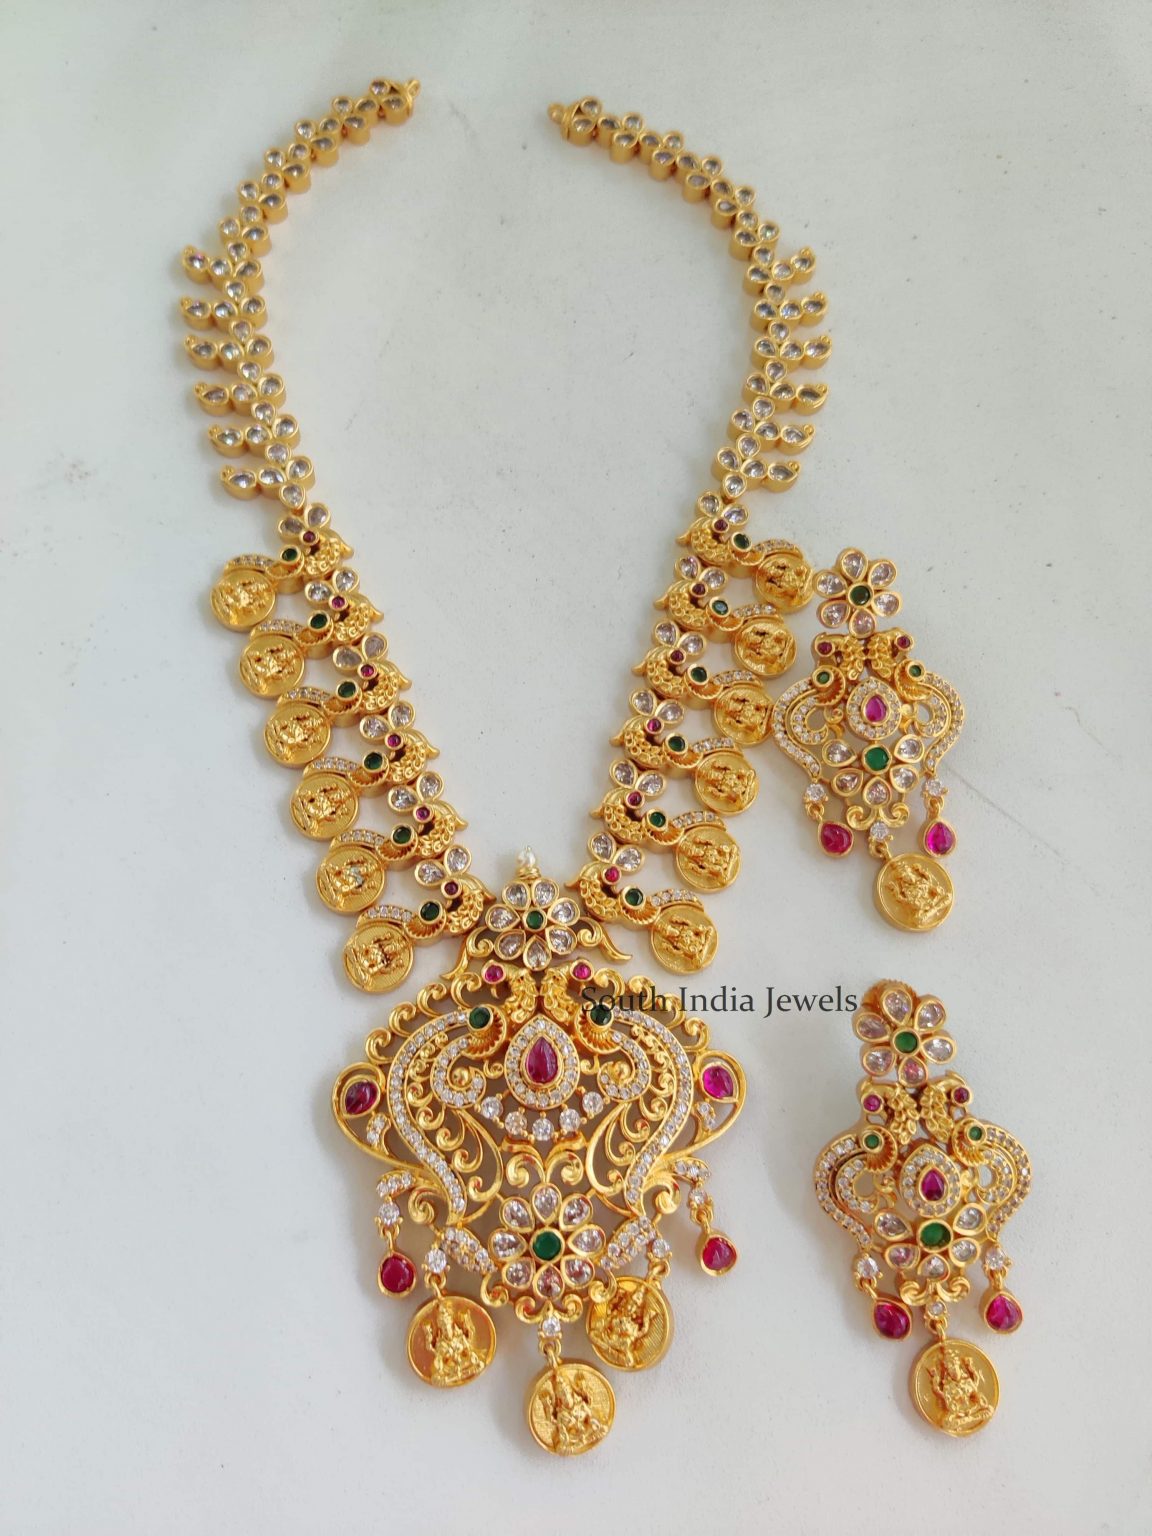 Traditional Lakshmi Haram with Earrings - South India Jewels